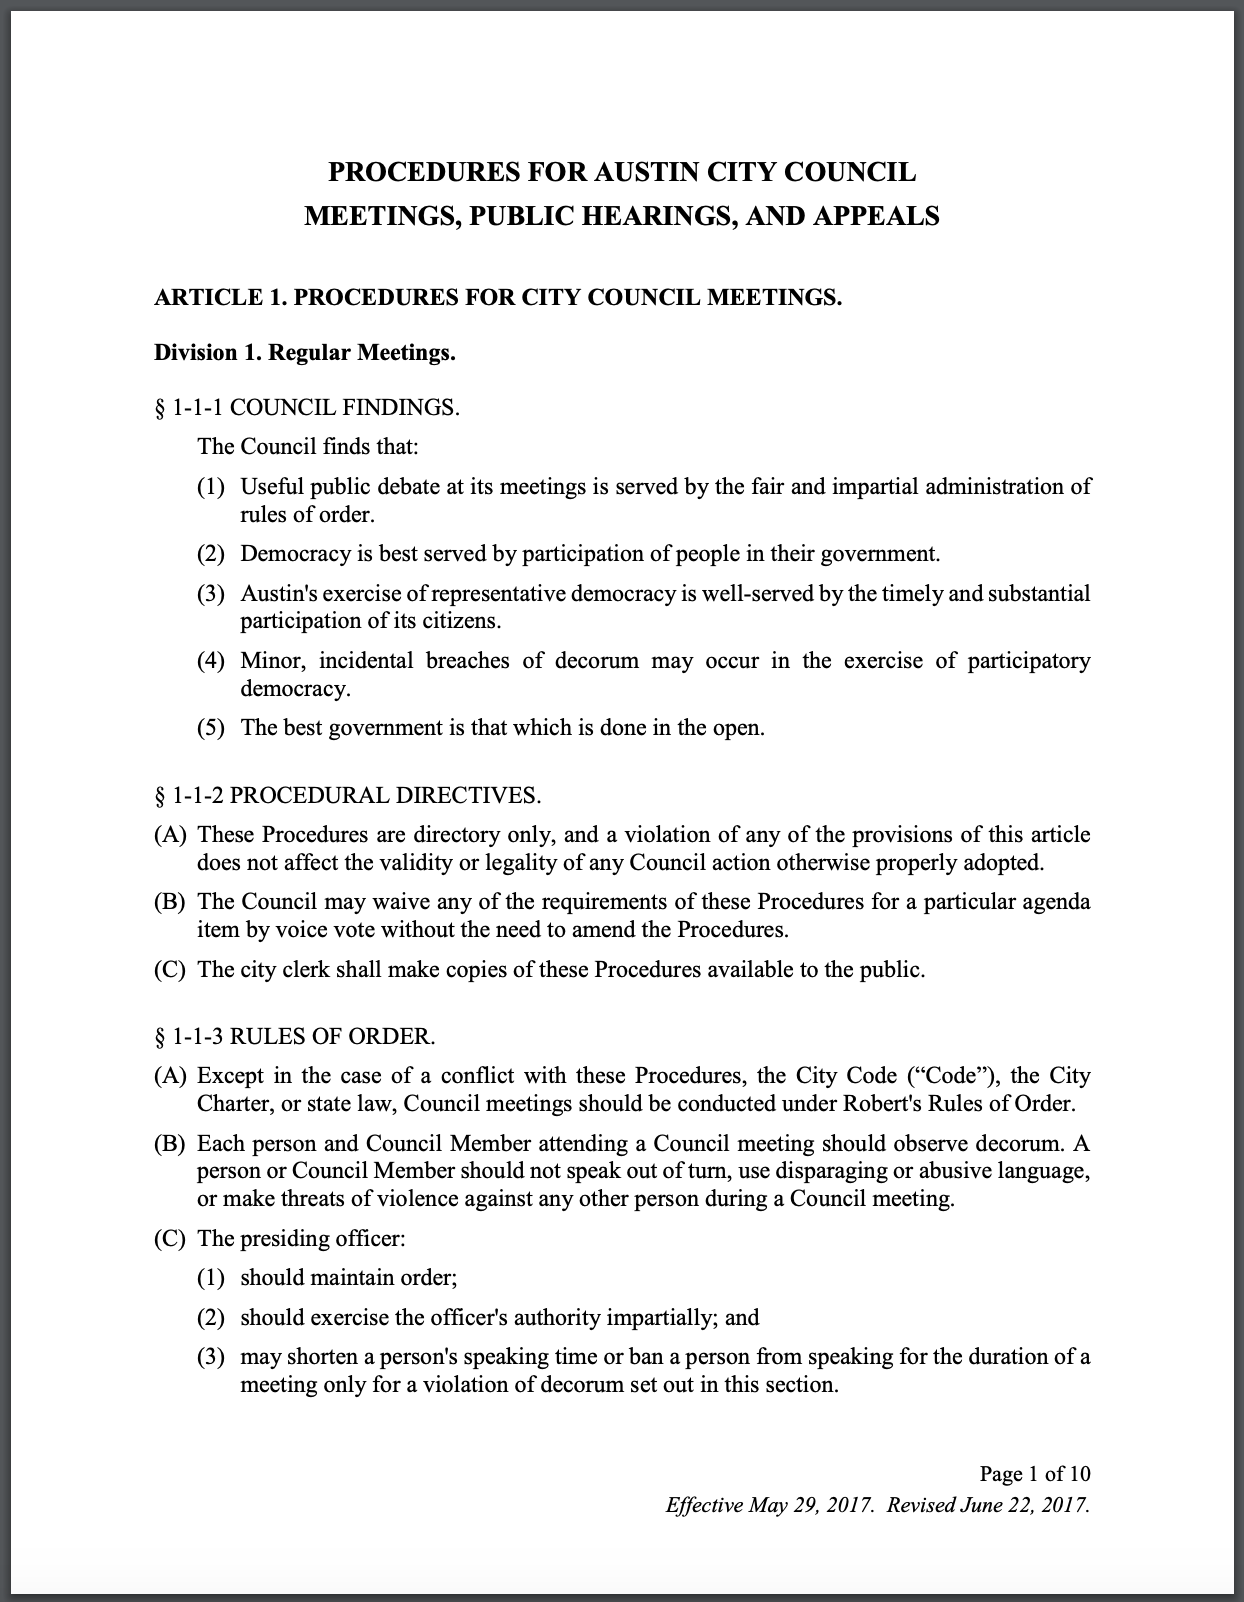 A dense document with the title, “Procedures for Austin City Council Meetings, Public Hearings and Appeals”.